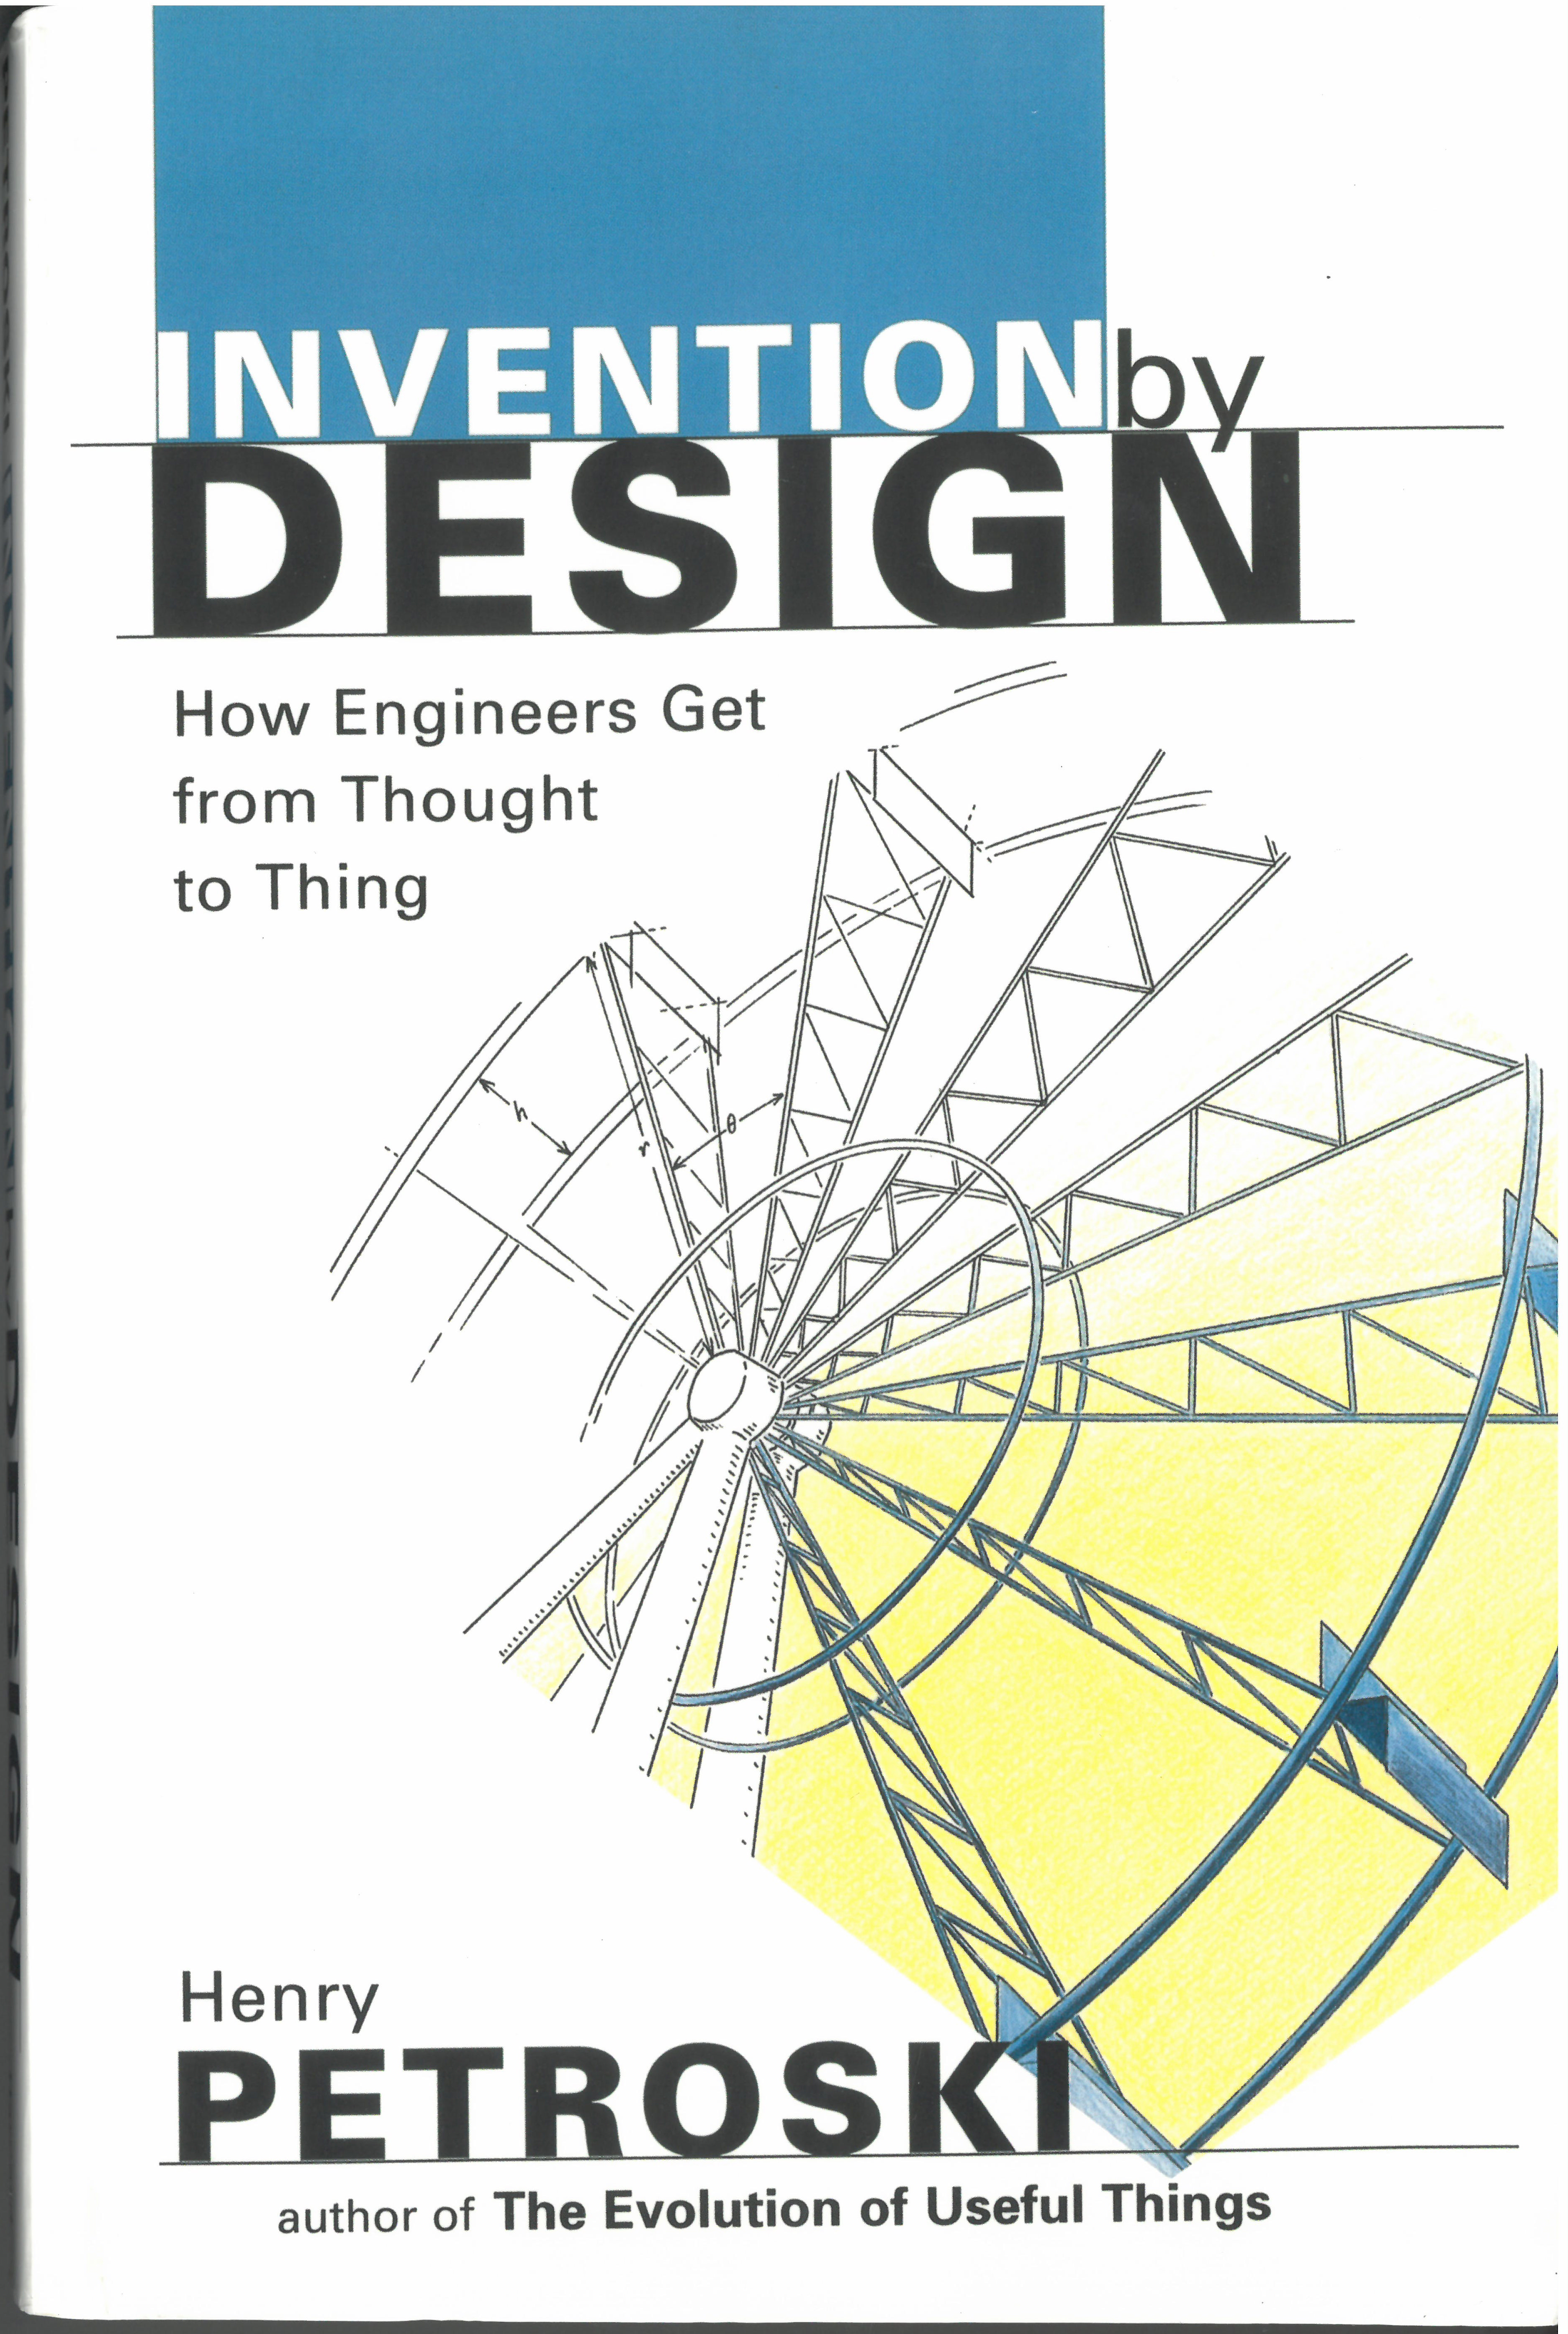 A thumbnail of the cover of the book "Invention by Design: How Engineers Get from Thought to Thing," by Henry Petroski. The book features Dr. Gary K. Michelson's patent on a new paperclip design intended to help people with difficulty using their hands.